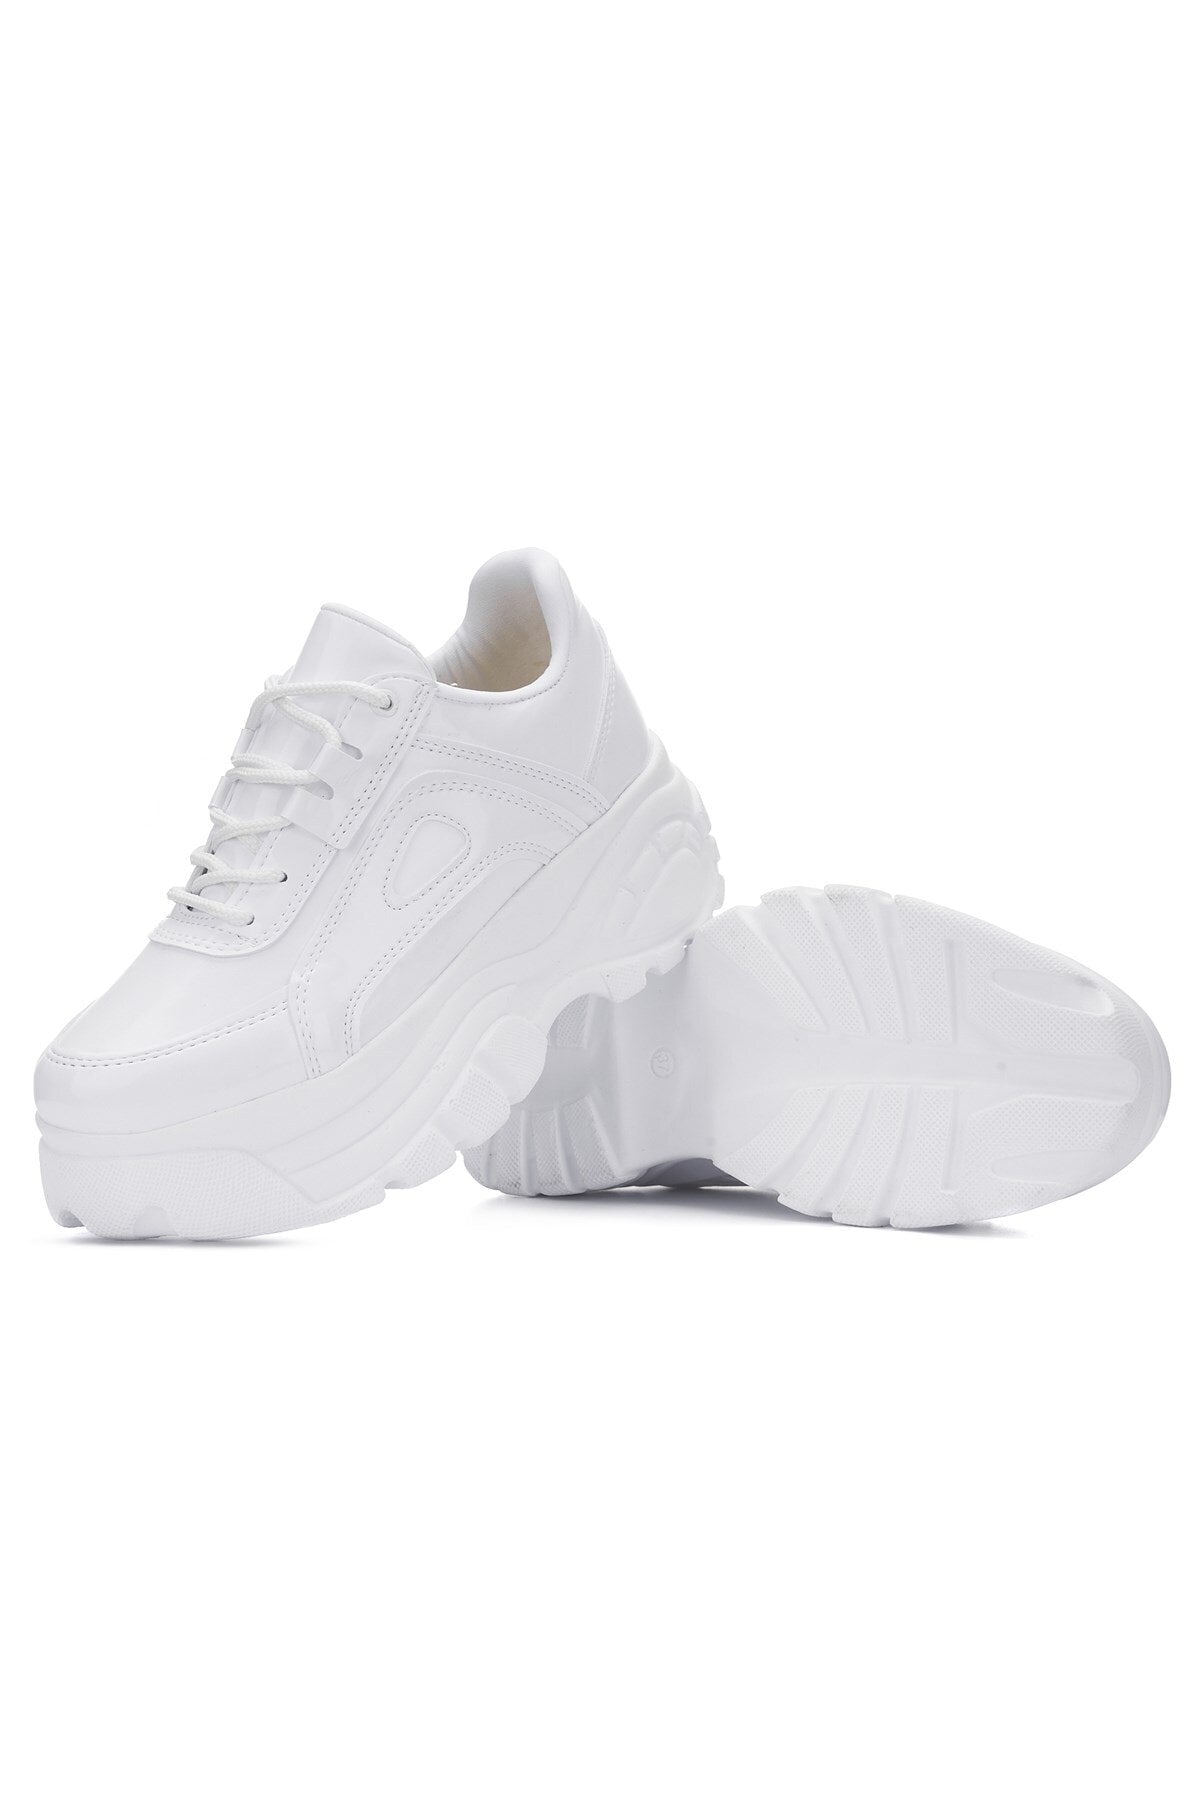 DAILY WOMEN WHITE LEATERS SPORTS SHOE